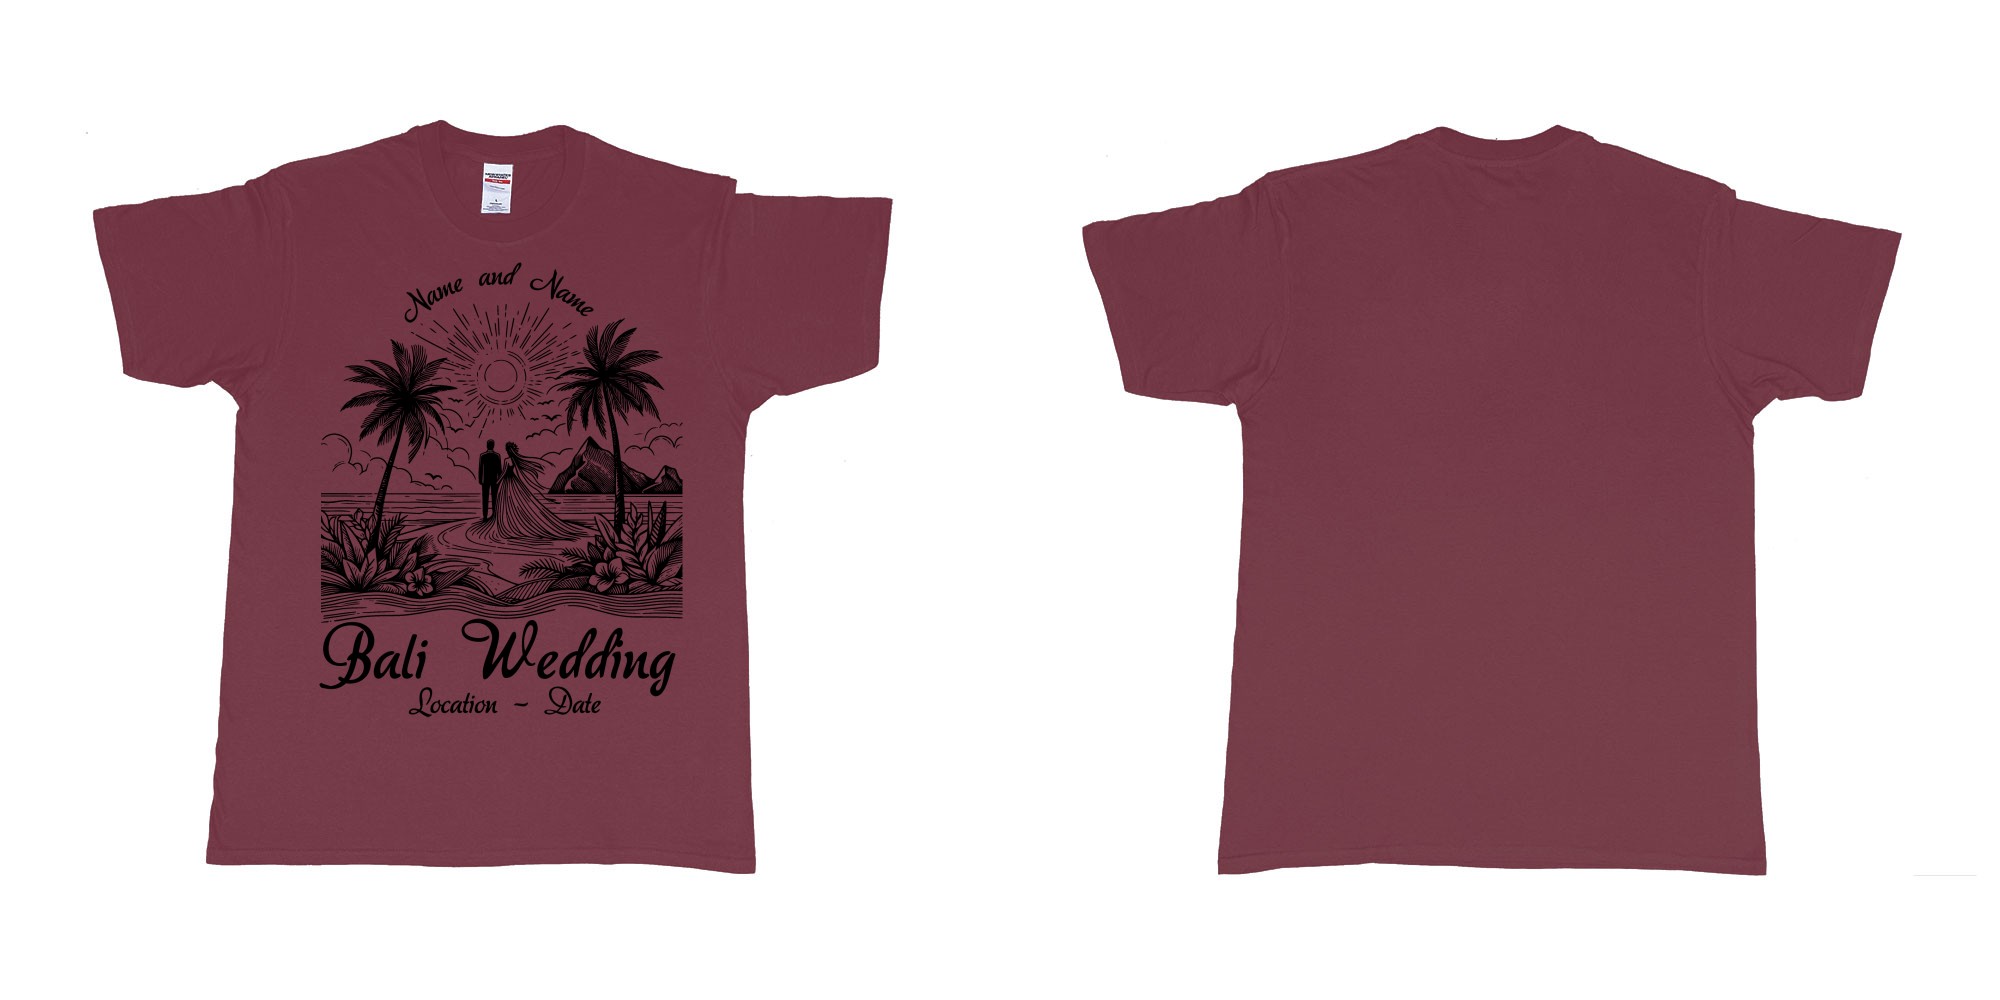 Custom tshirt design bali wedding drawing couple beach sunset palmtrees in fabric color marron choice your own text made in Bali by The Pirate Way